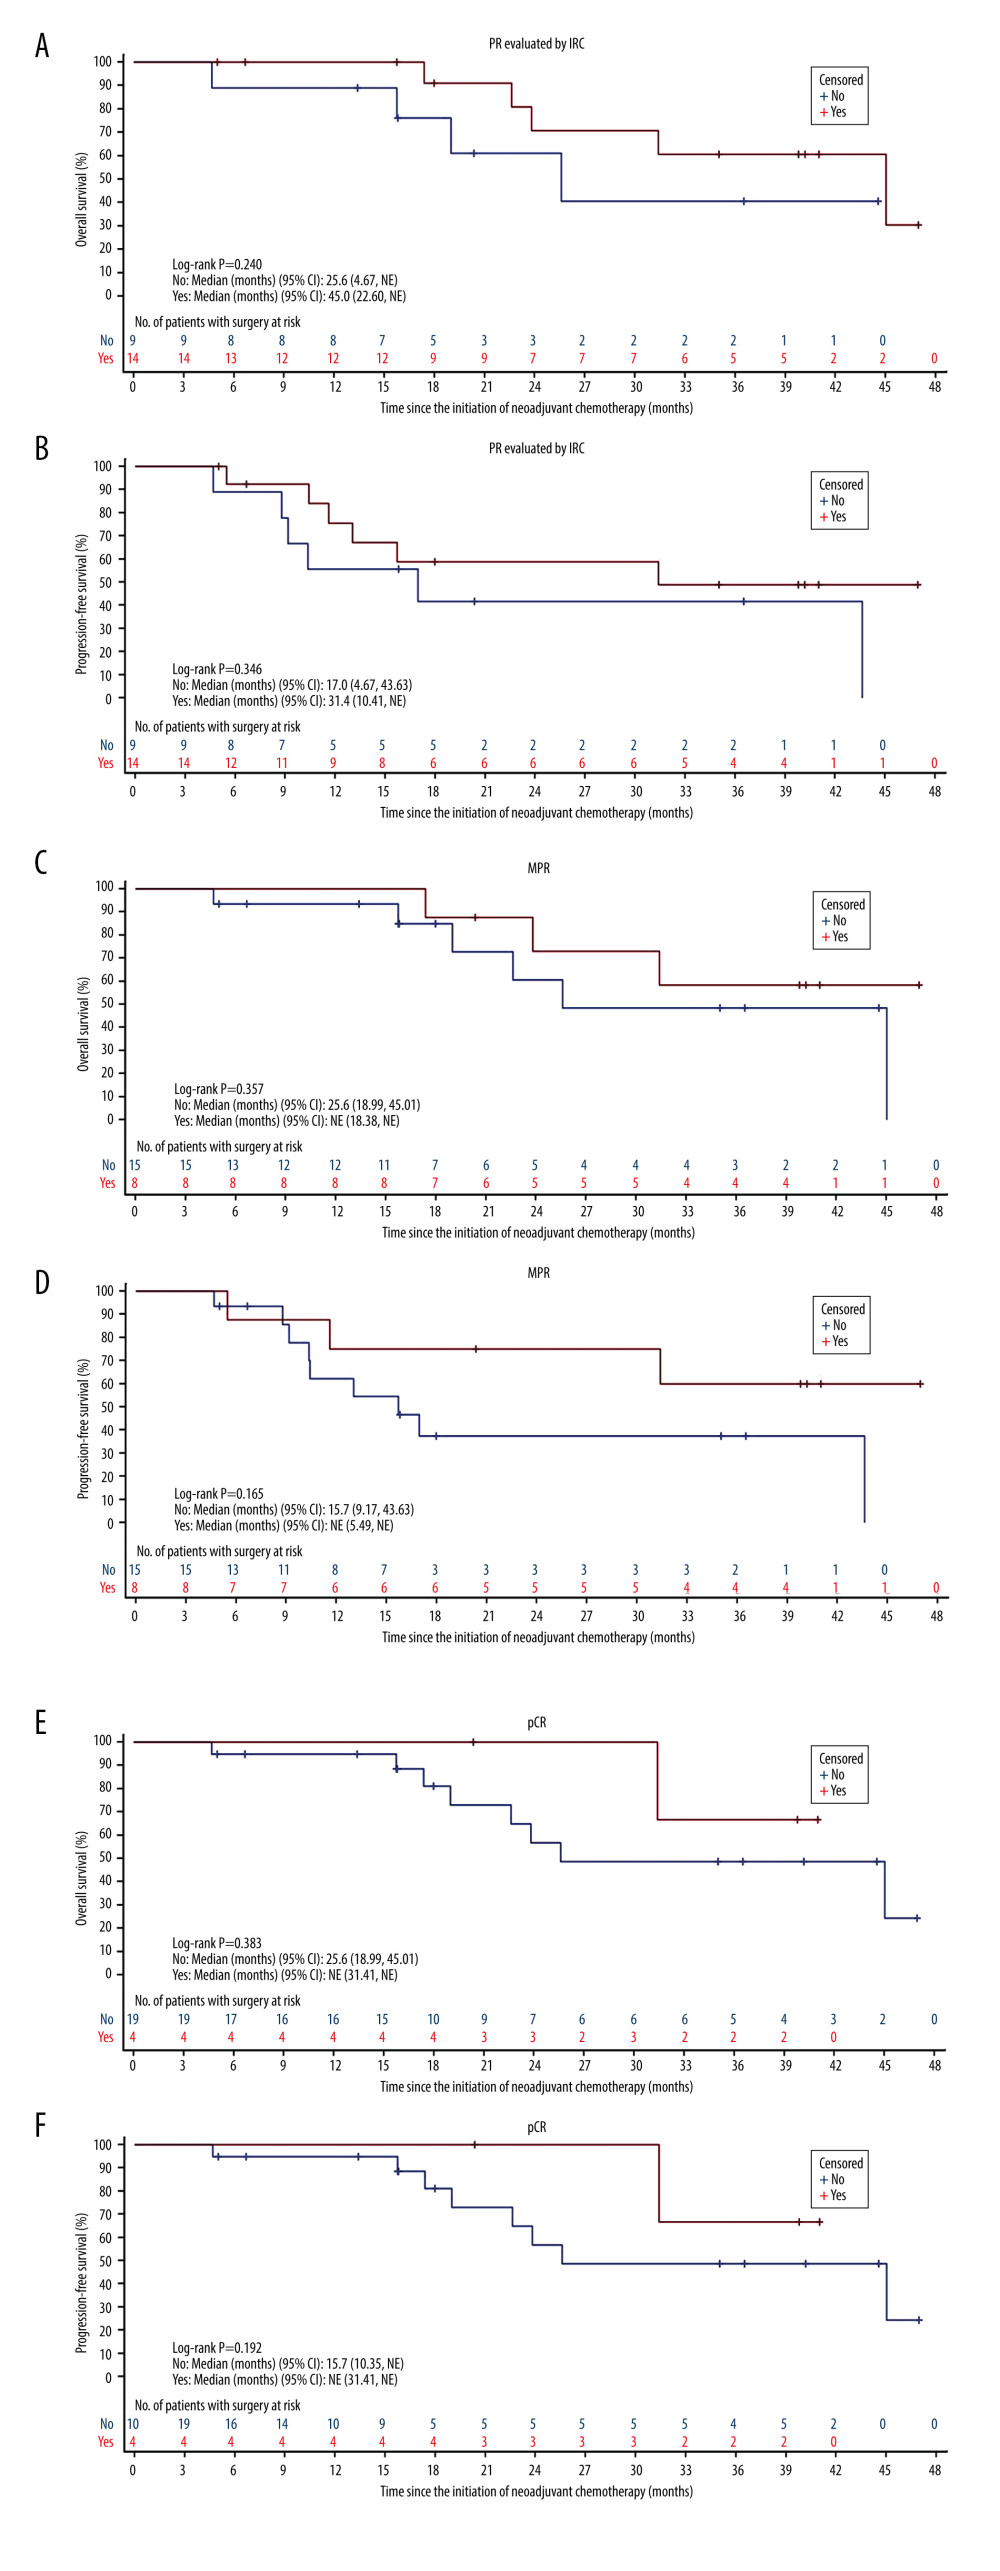 Survival outcomes by different short-term efficacy endpoints of patients with squamous cell carcinoma of the lung treated with neoadjuvant nab-paclitaxel and carboplatin. (A) PR for OS. (B) PR for PFS. (C) MPR for OS. (D) MPR for PFS. (E) pCR for OS. (F) pCR for PFS. PR – partial response; OS – overall survival; PFS – progression-free survival; MPR – major pathologic response; OS – overall survival; pCR – pathologic complete response; CI – confidence interval; NE – not evaluable; IRC – Independent Reviewer Committee.